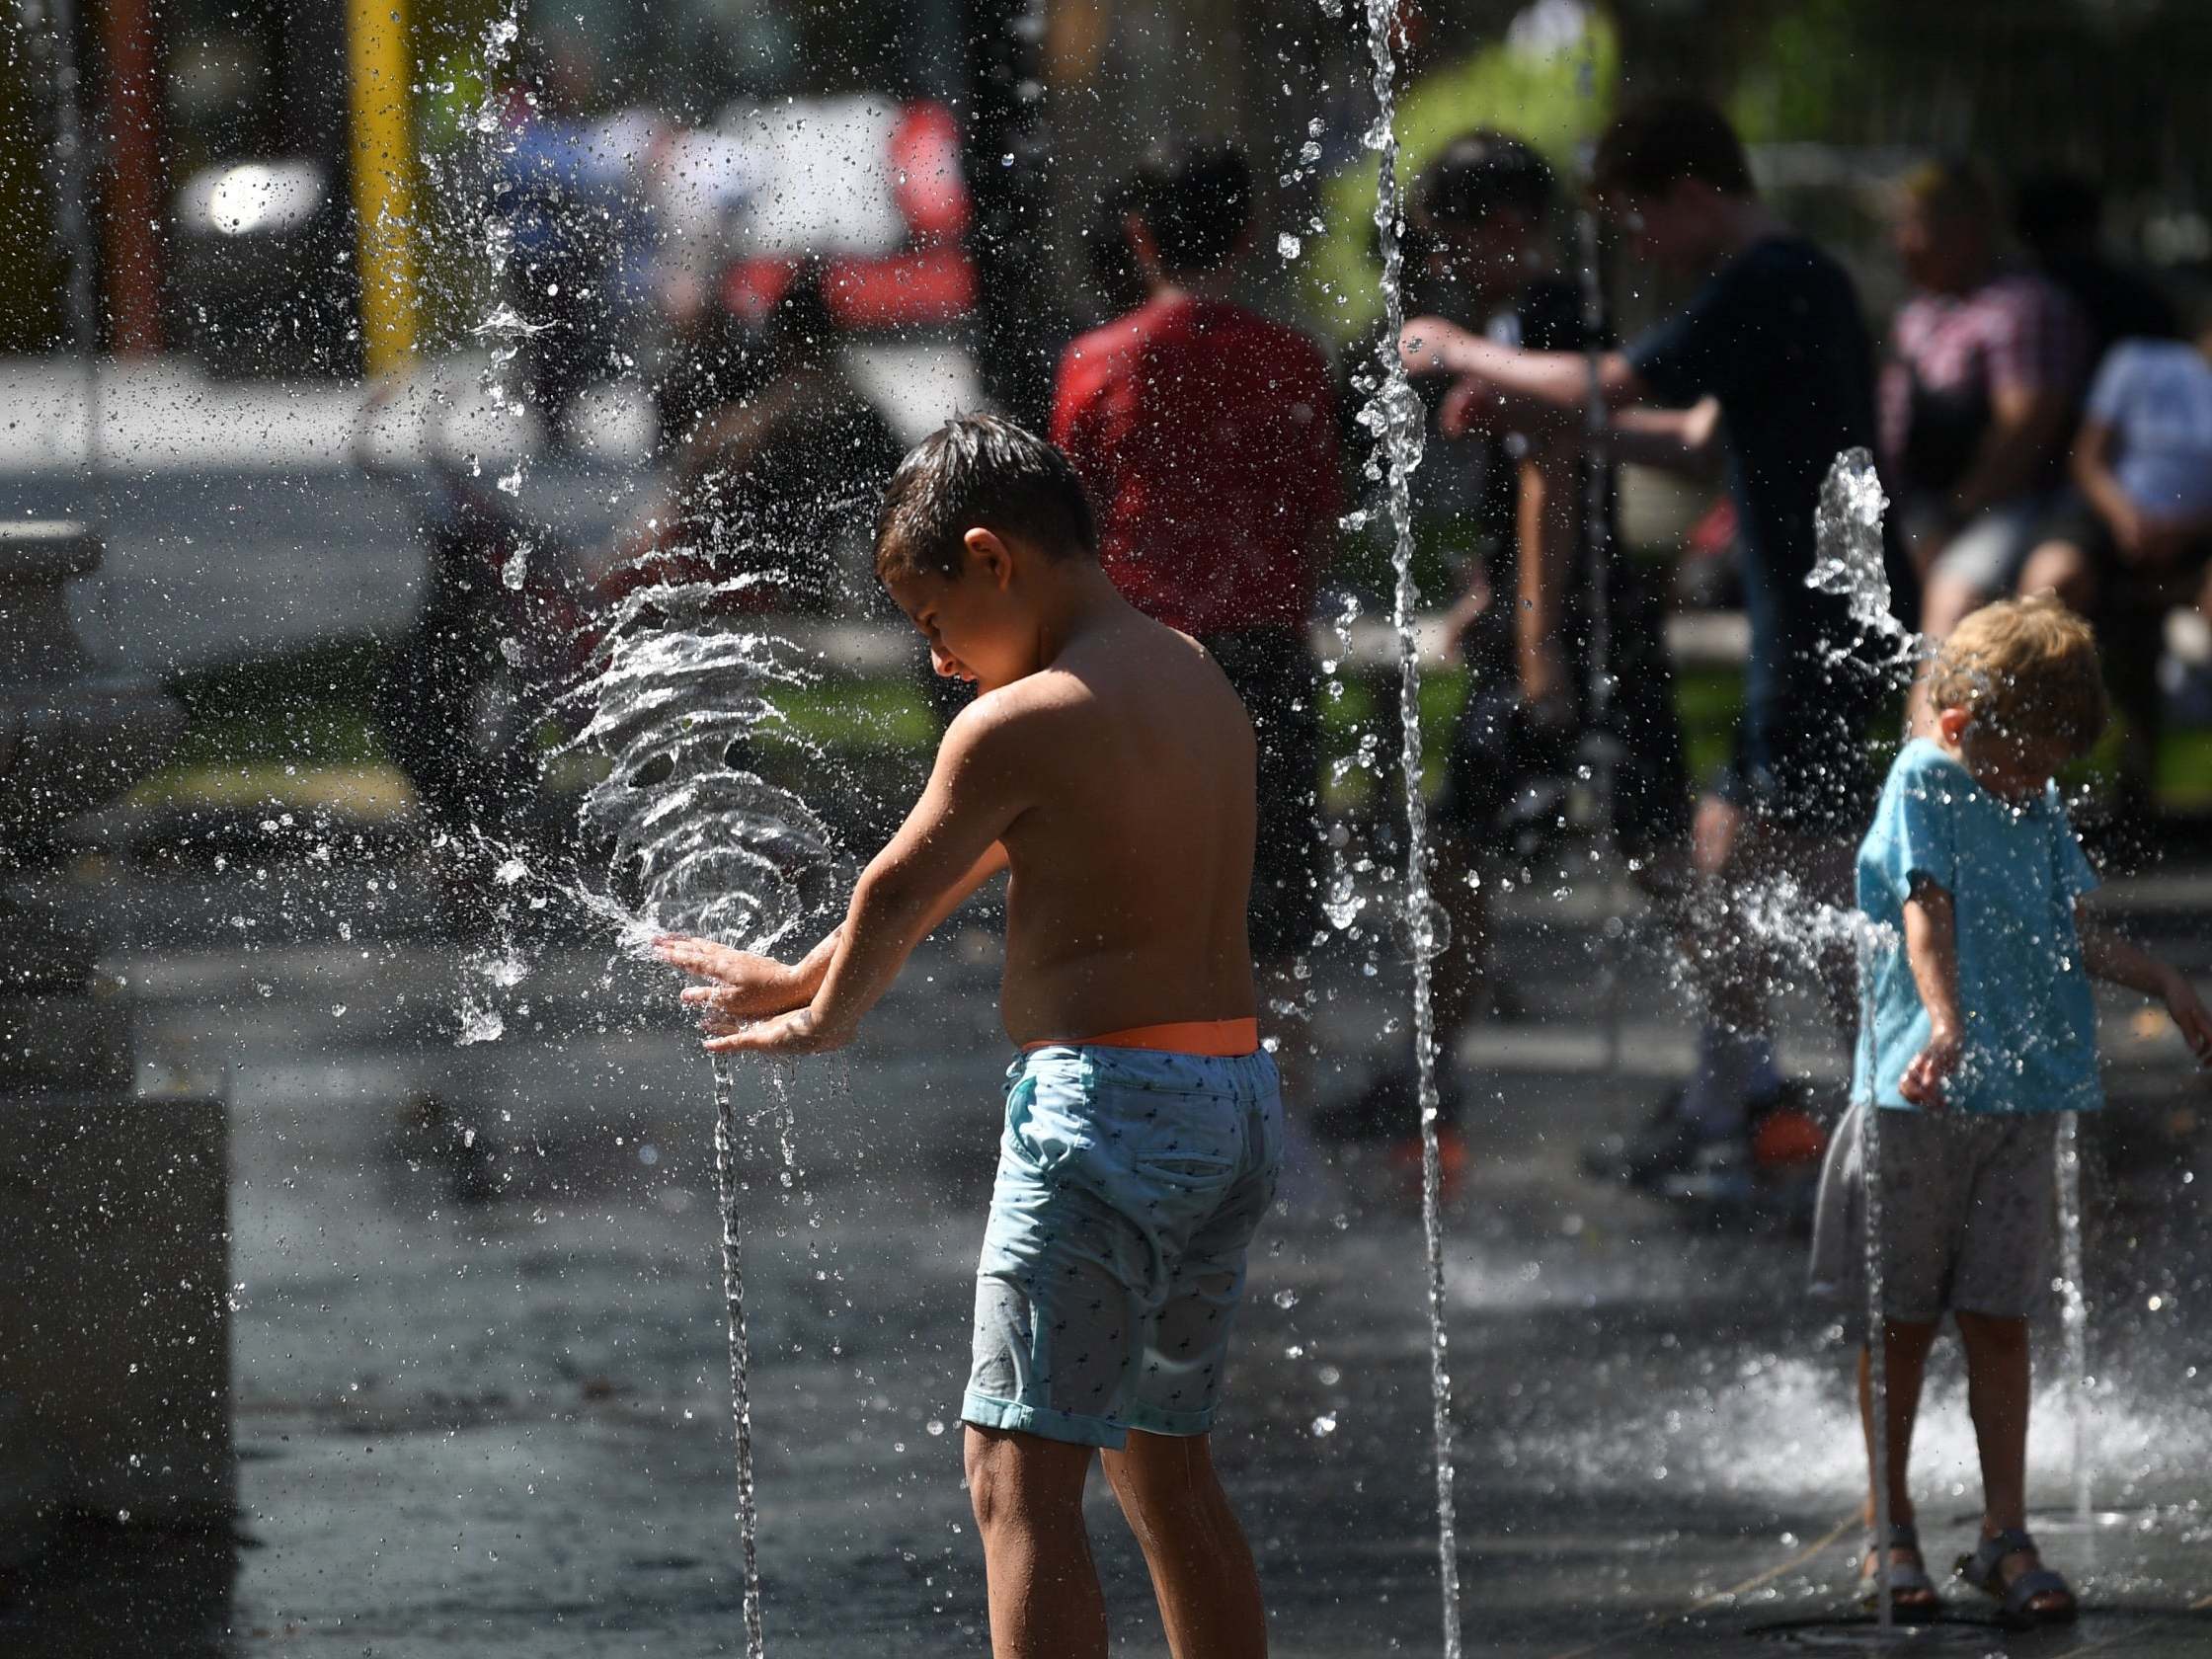 Children cool themselves in fountains during a heatwave